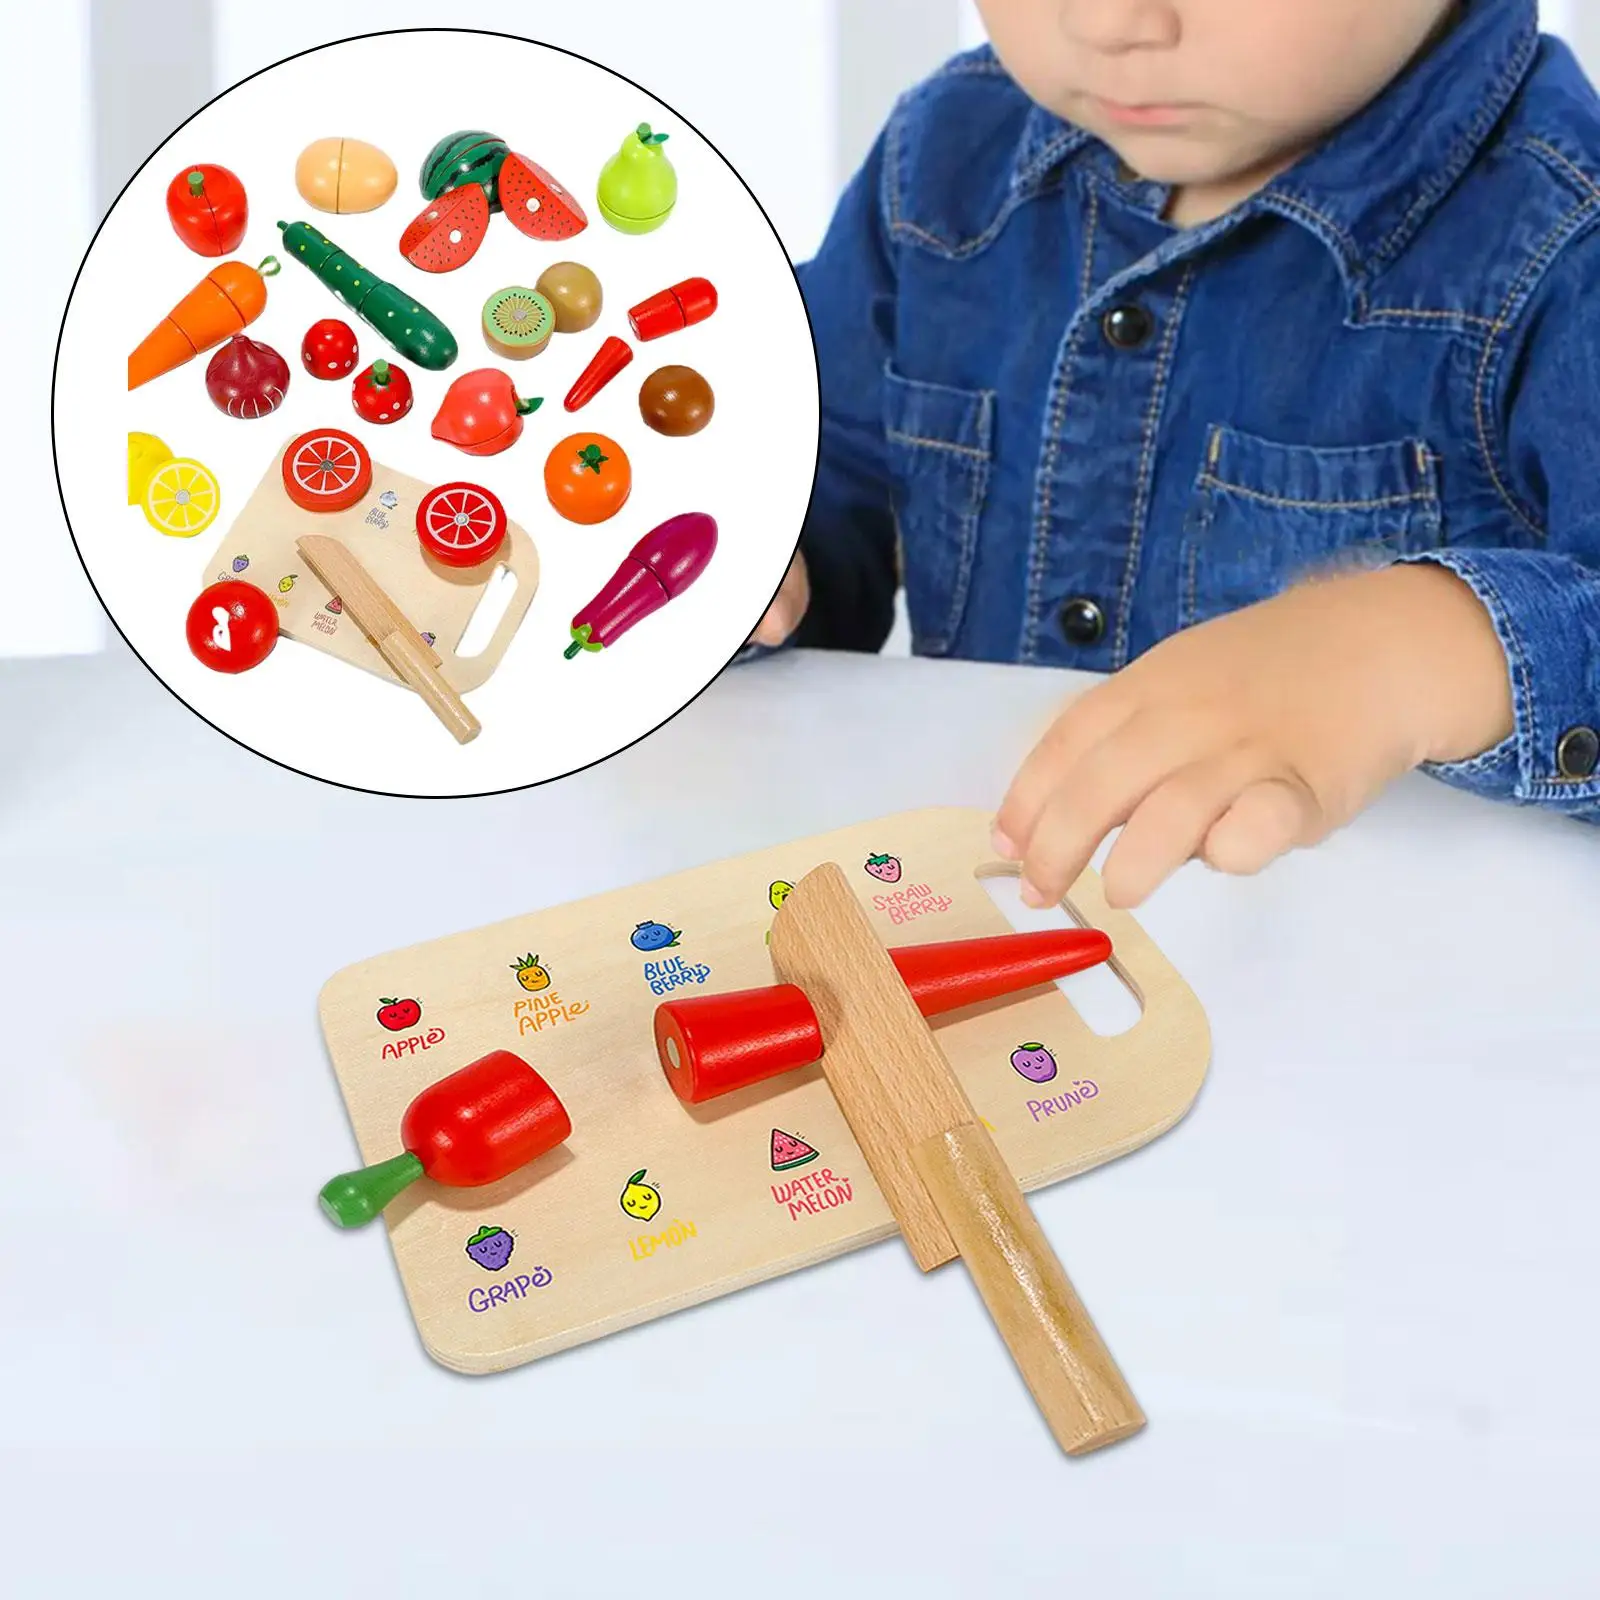 Wood Cutting Fruit Play Food Kitchen Accessories Toy Smooth Edge Durable Colorful for Kids , Boys, Girls Gift Easily Store